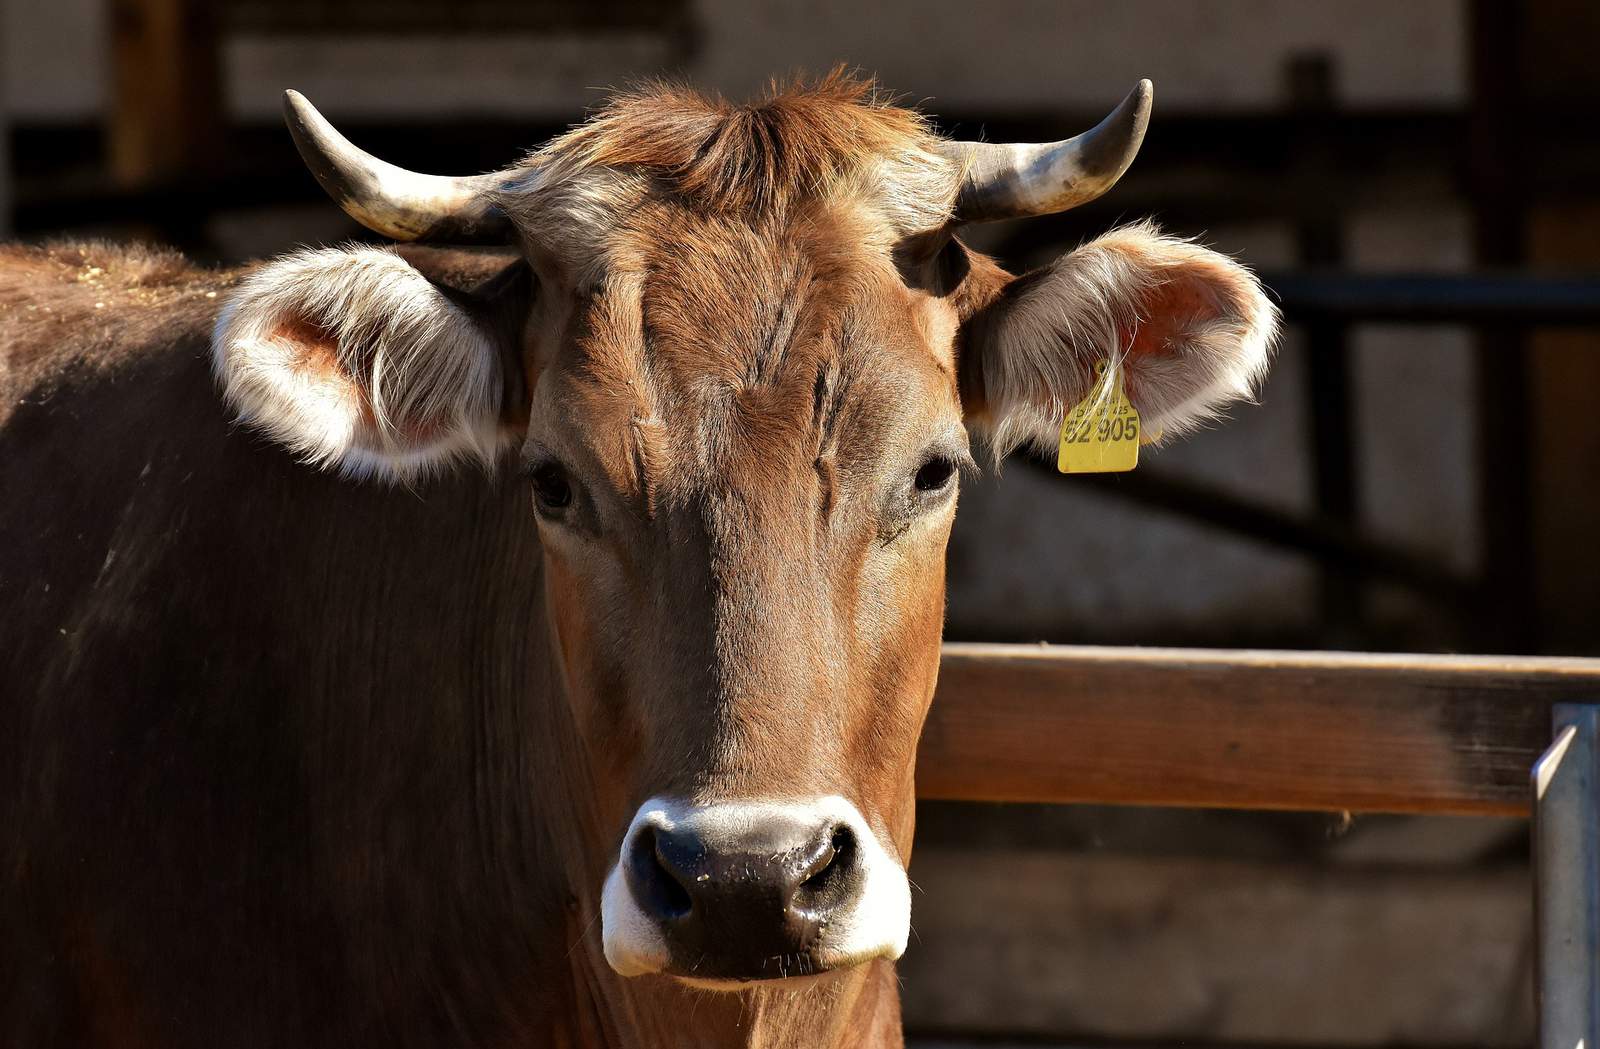 People who visited cattle barn at SA rodeo might need to be checked for rabies